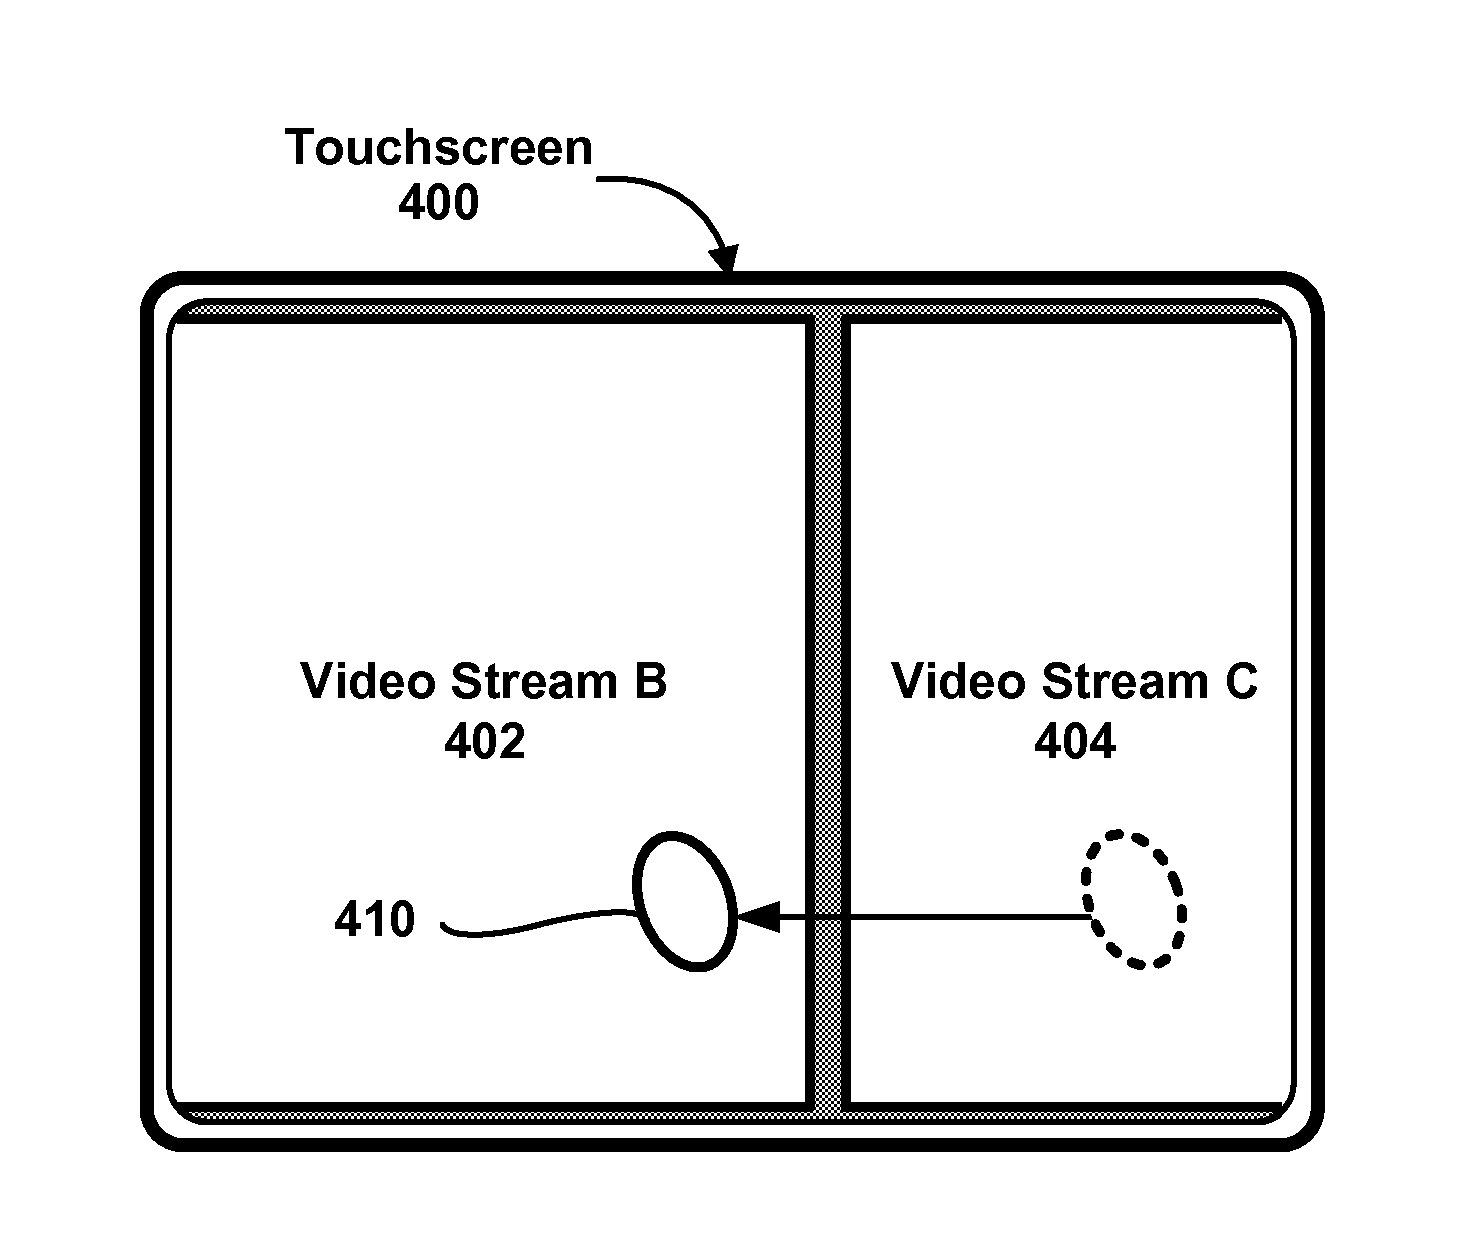 System and method for switching between media streams while providing a seamless user experience